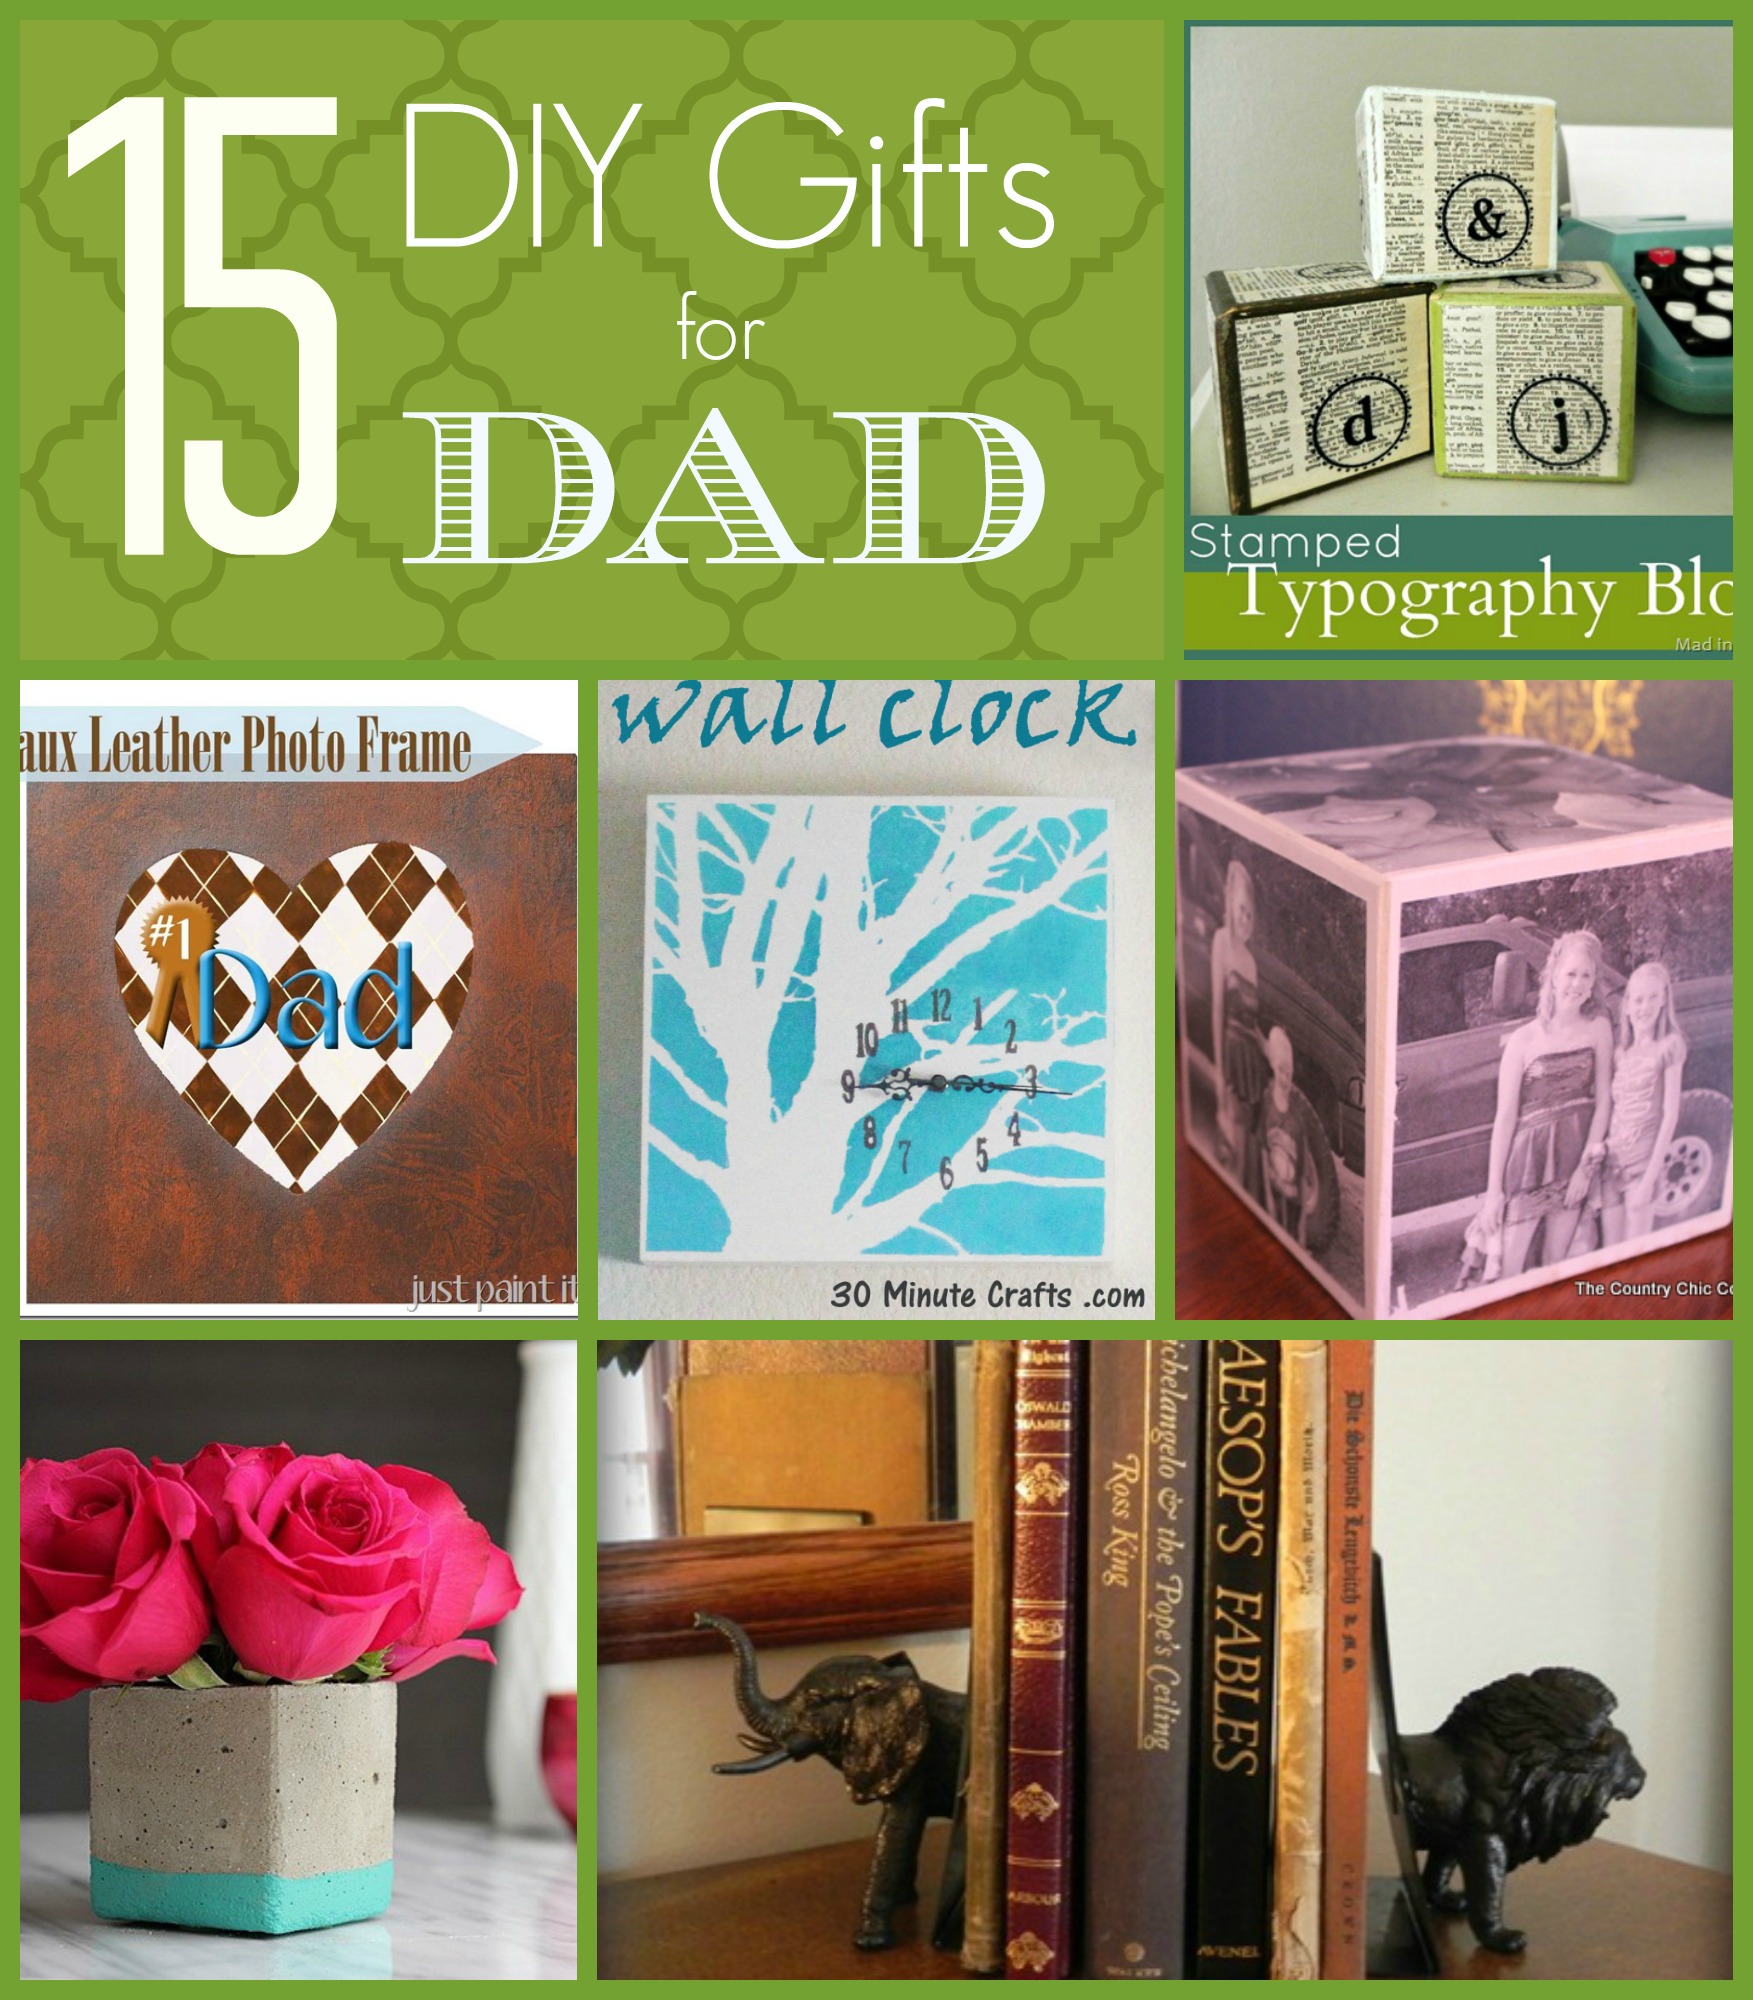 15 DIY Gift Ideas for Dad - Just Paint It Blog